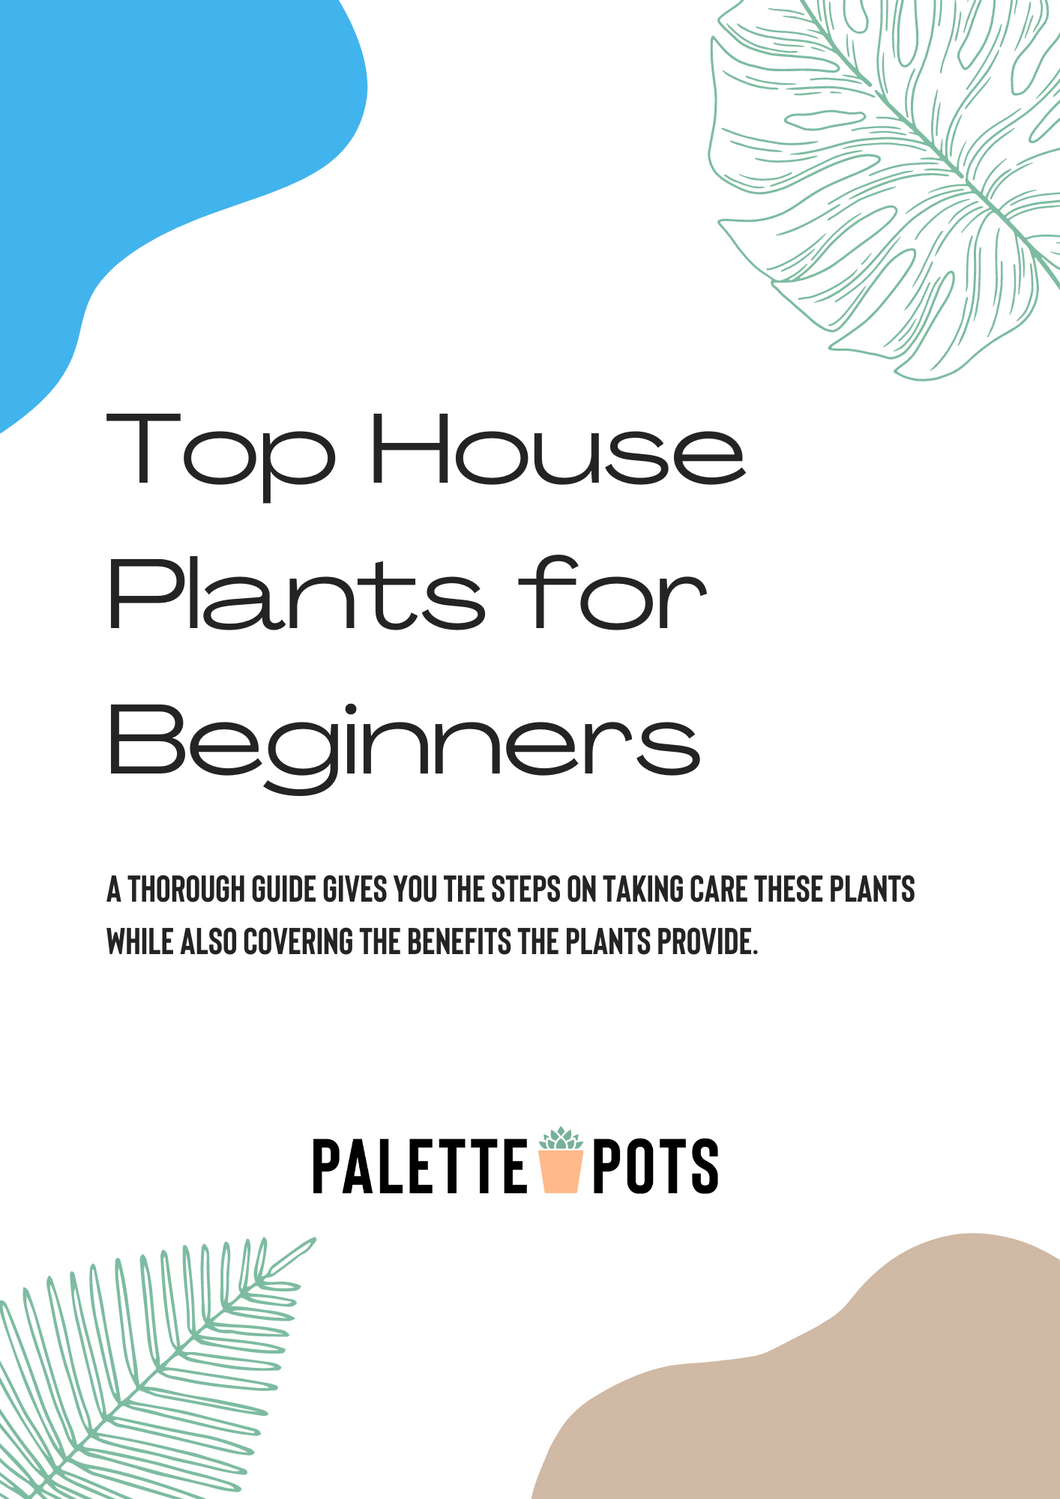 Top House Plants for Beginners - eBook